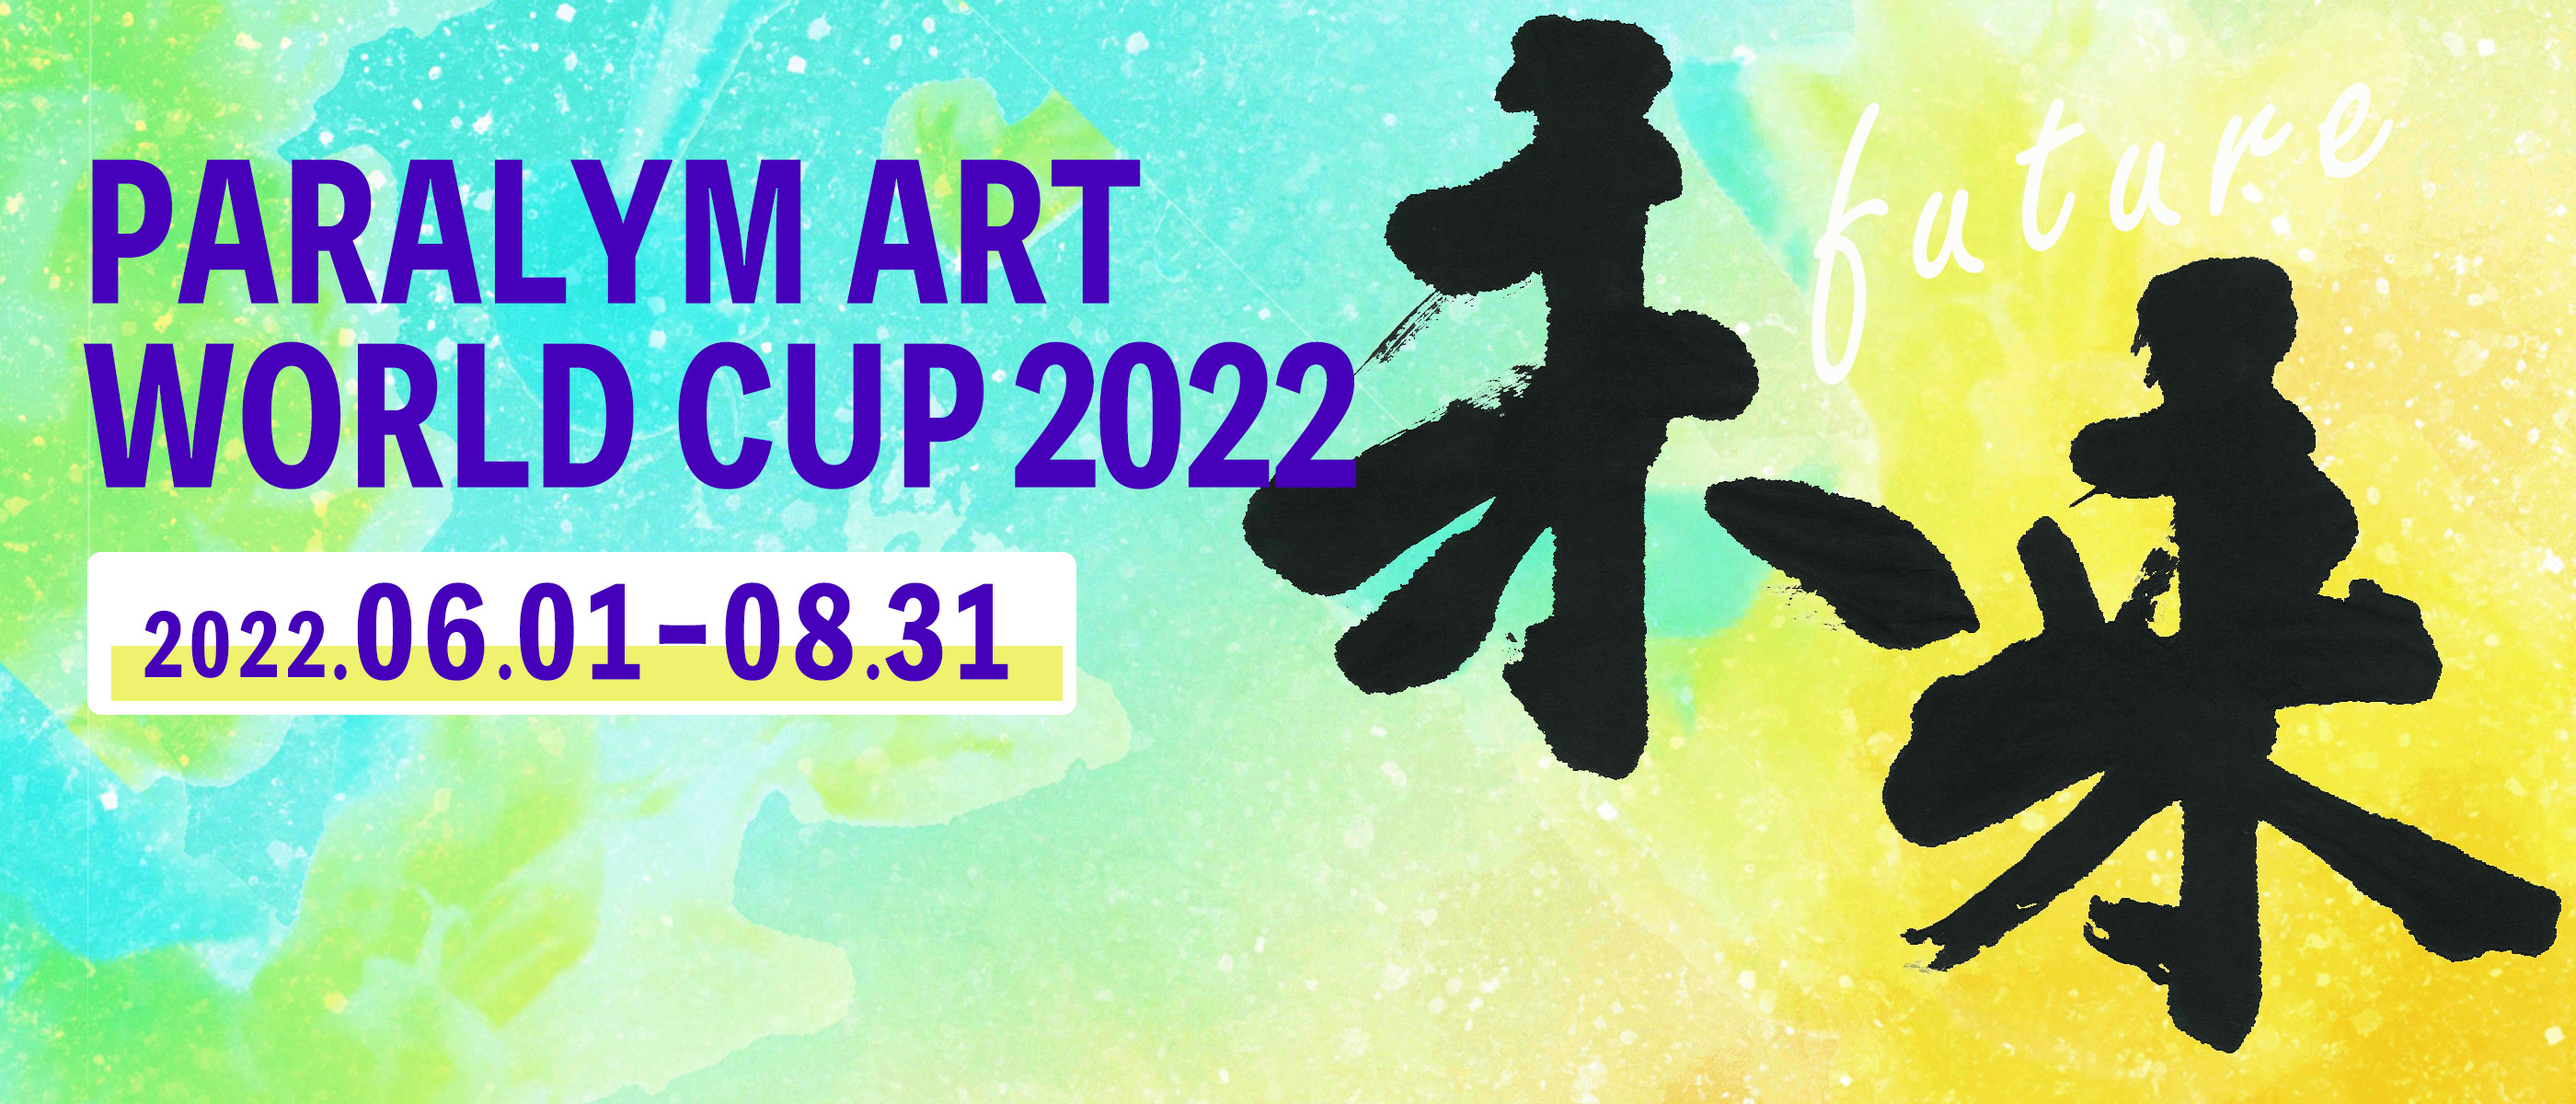 PARALYM ART WORLD CUP 2022